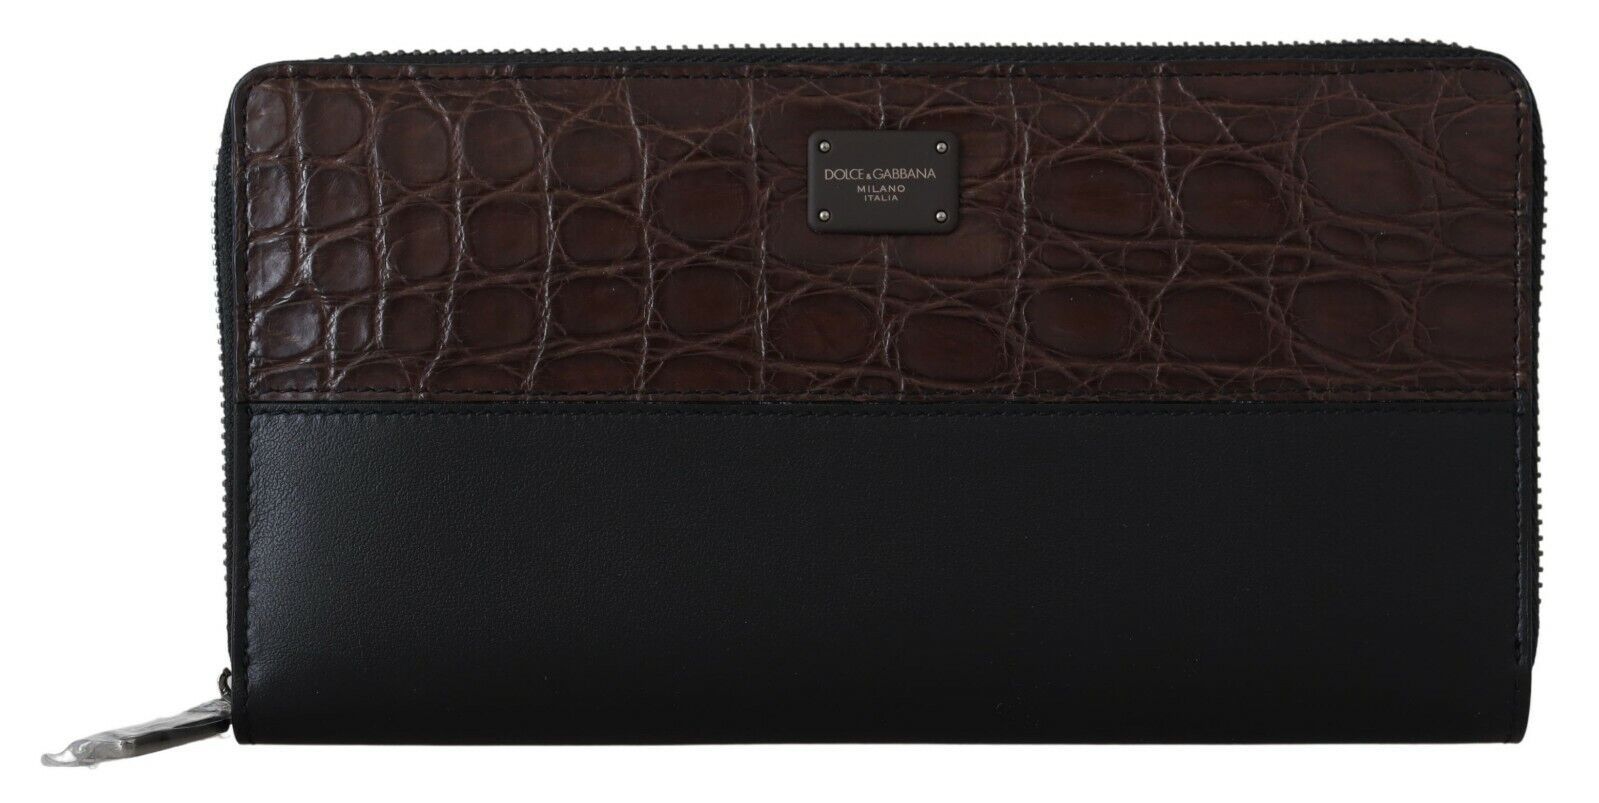 Elegant Textured Leather Continental Wallet